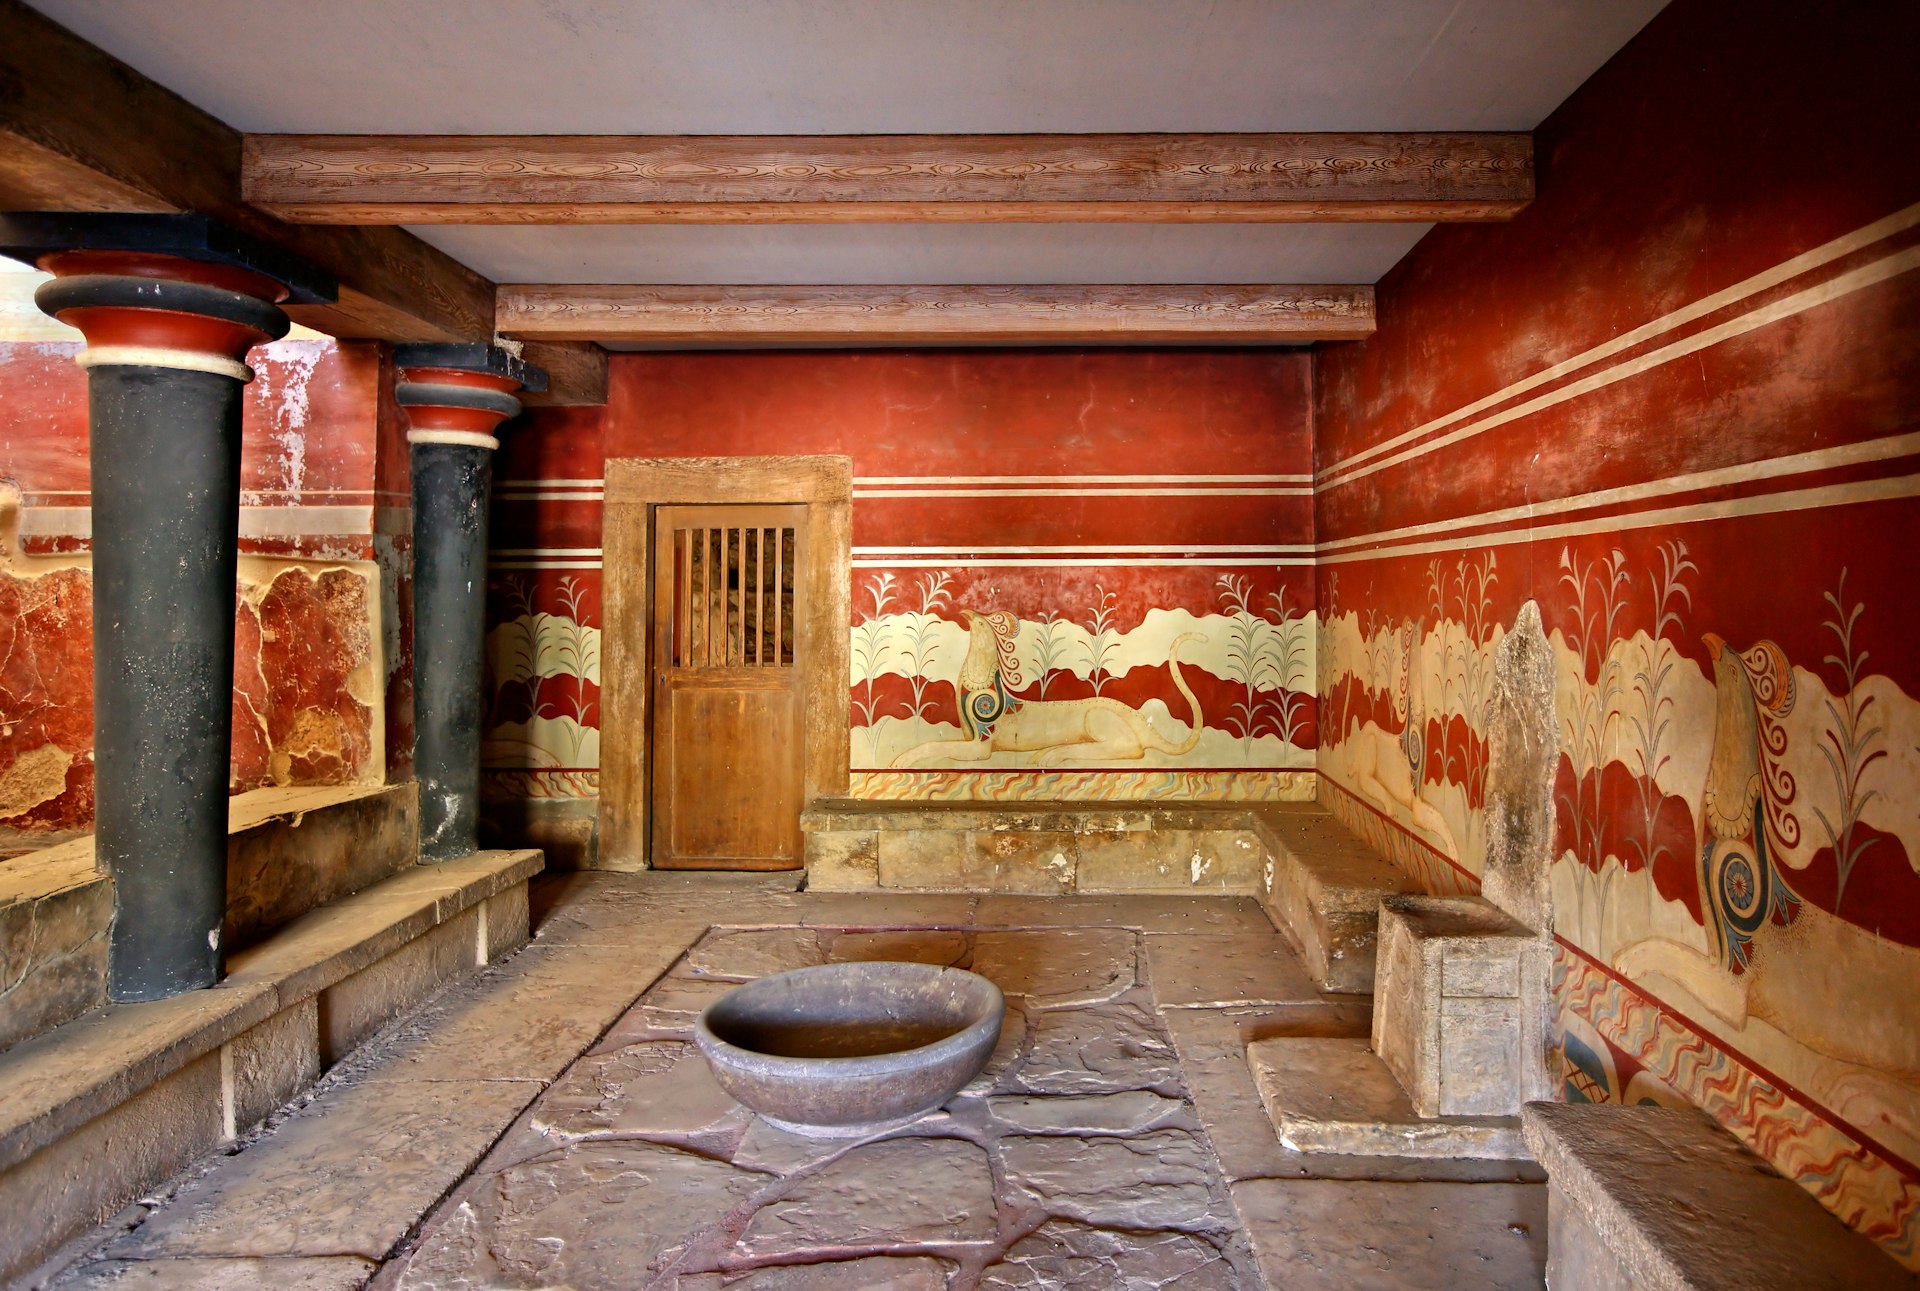 The hall of the throne in the Minoan Palace of Knossos, Heraklion